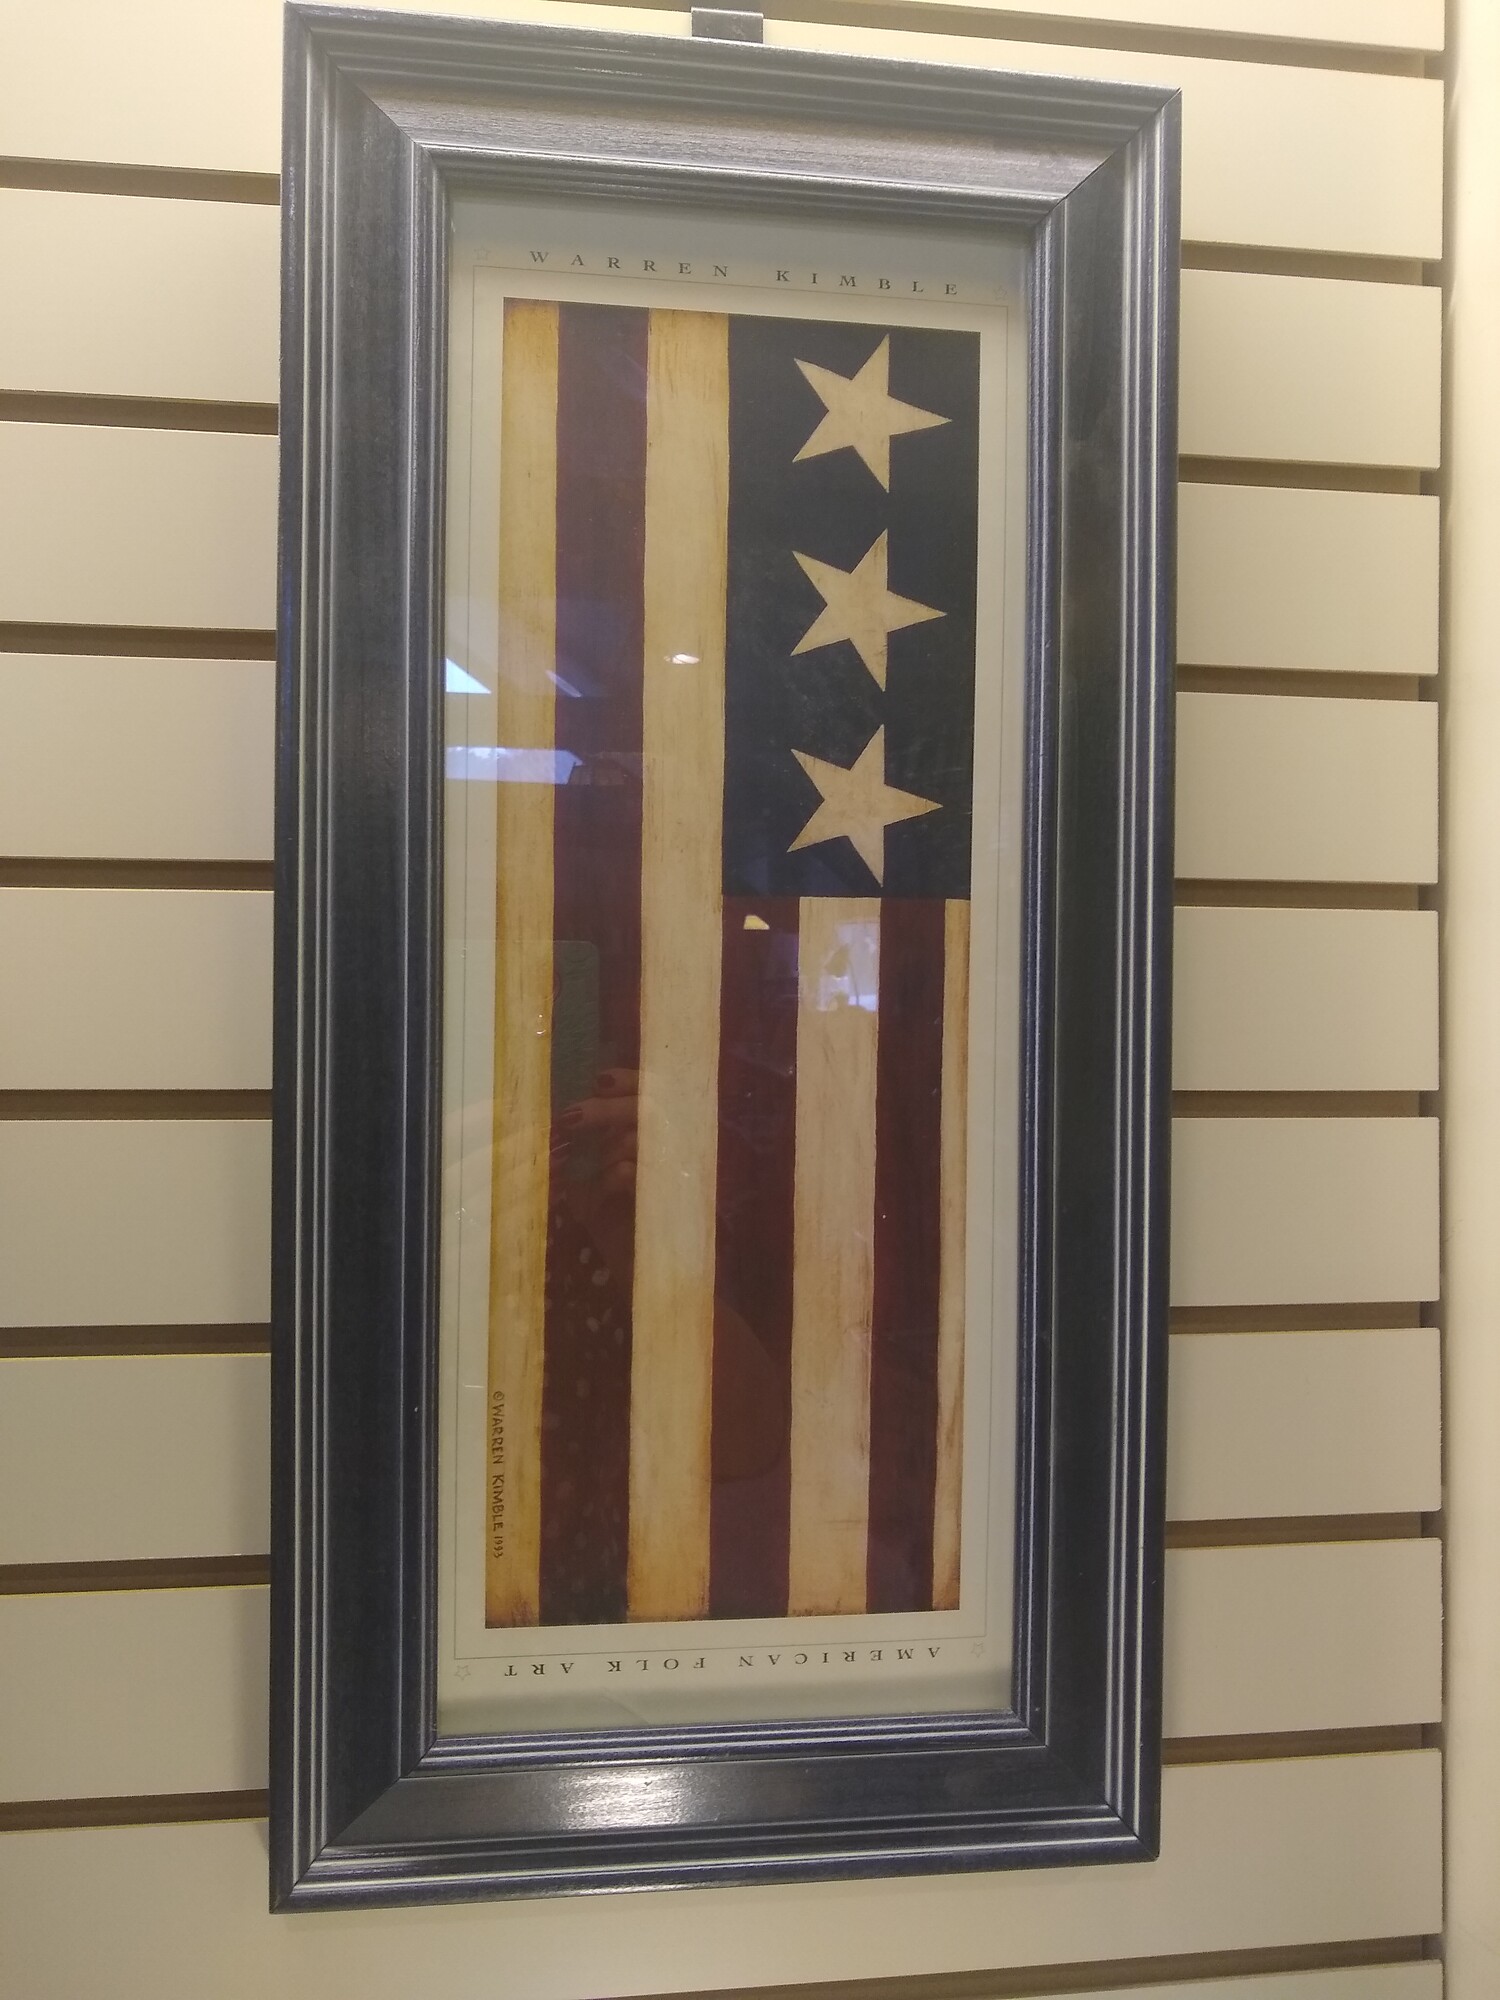 Warren Kimble Flag Print

Warren Kimble flag print with dark blue frame.

Size: 24 in wide X 11 in high